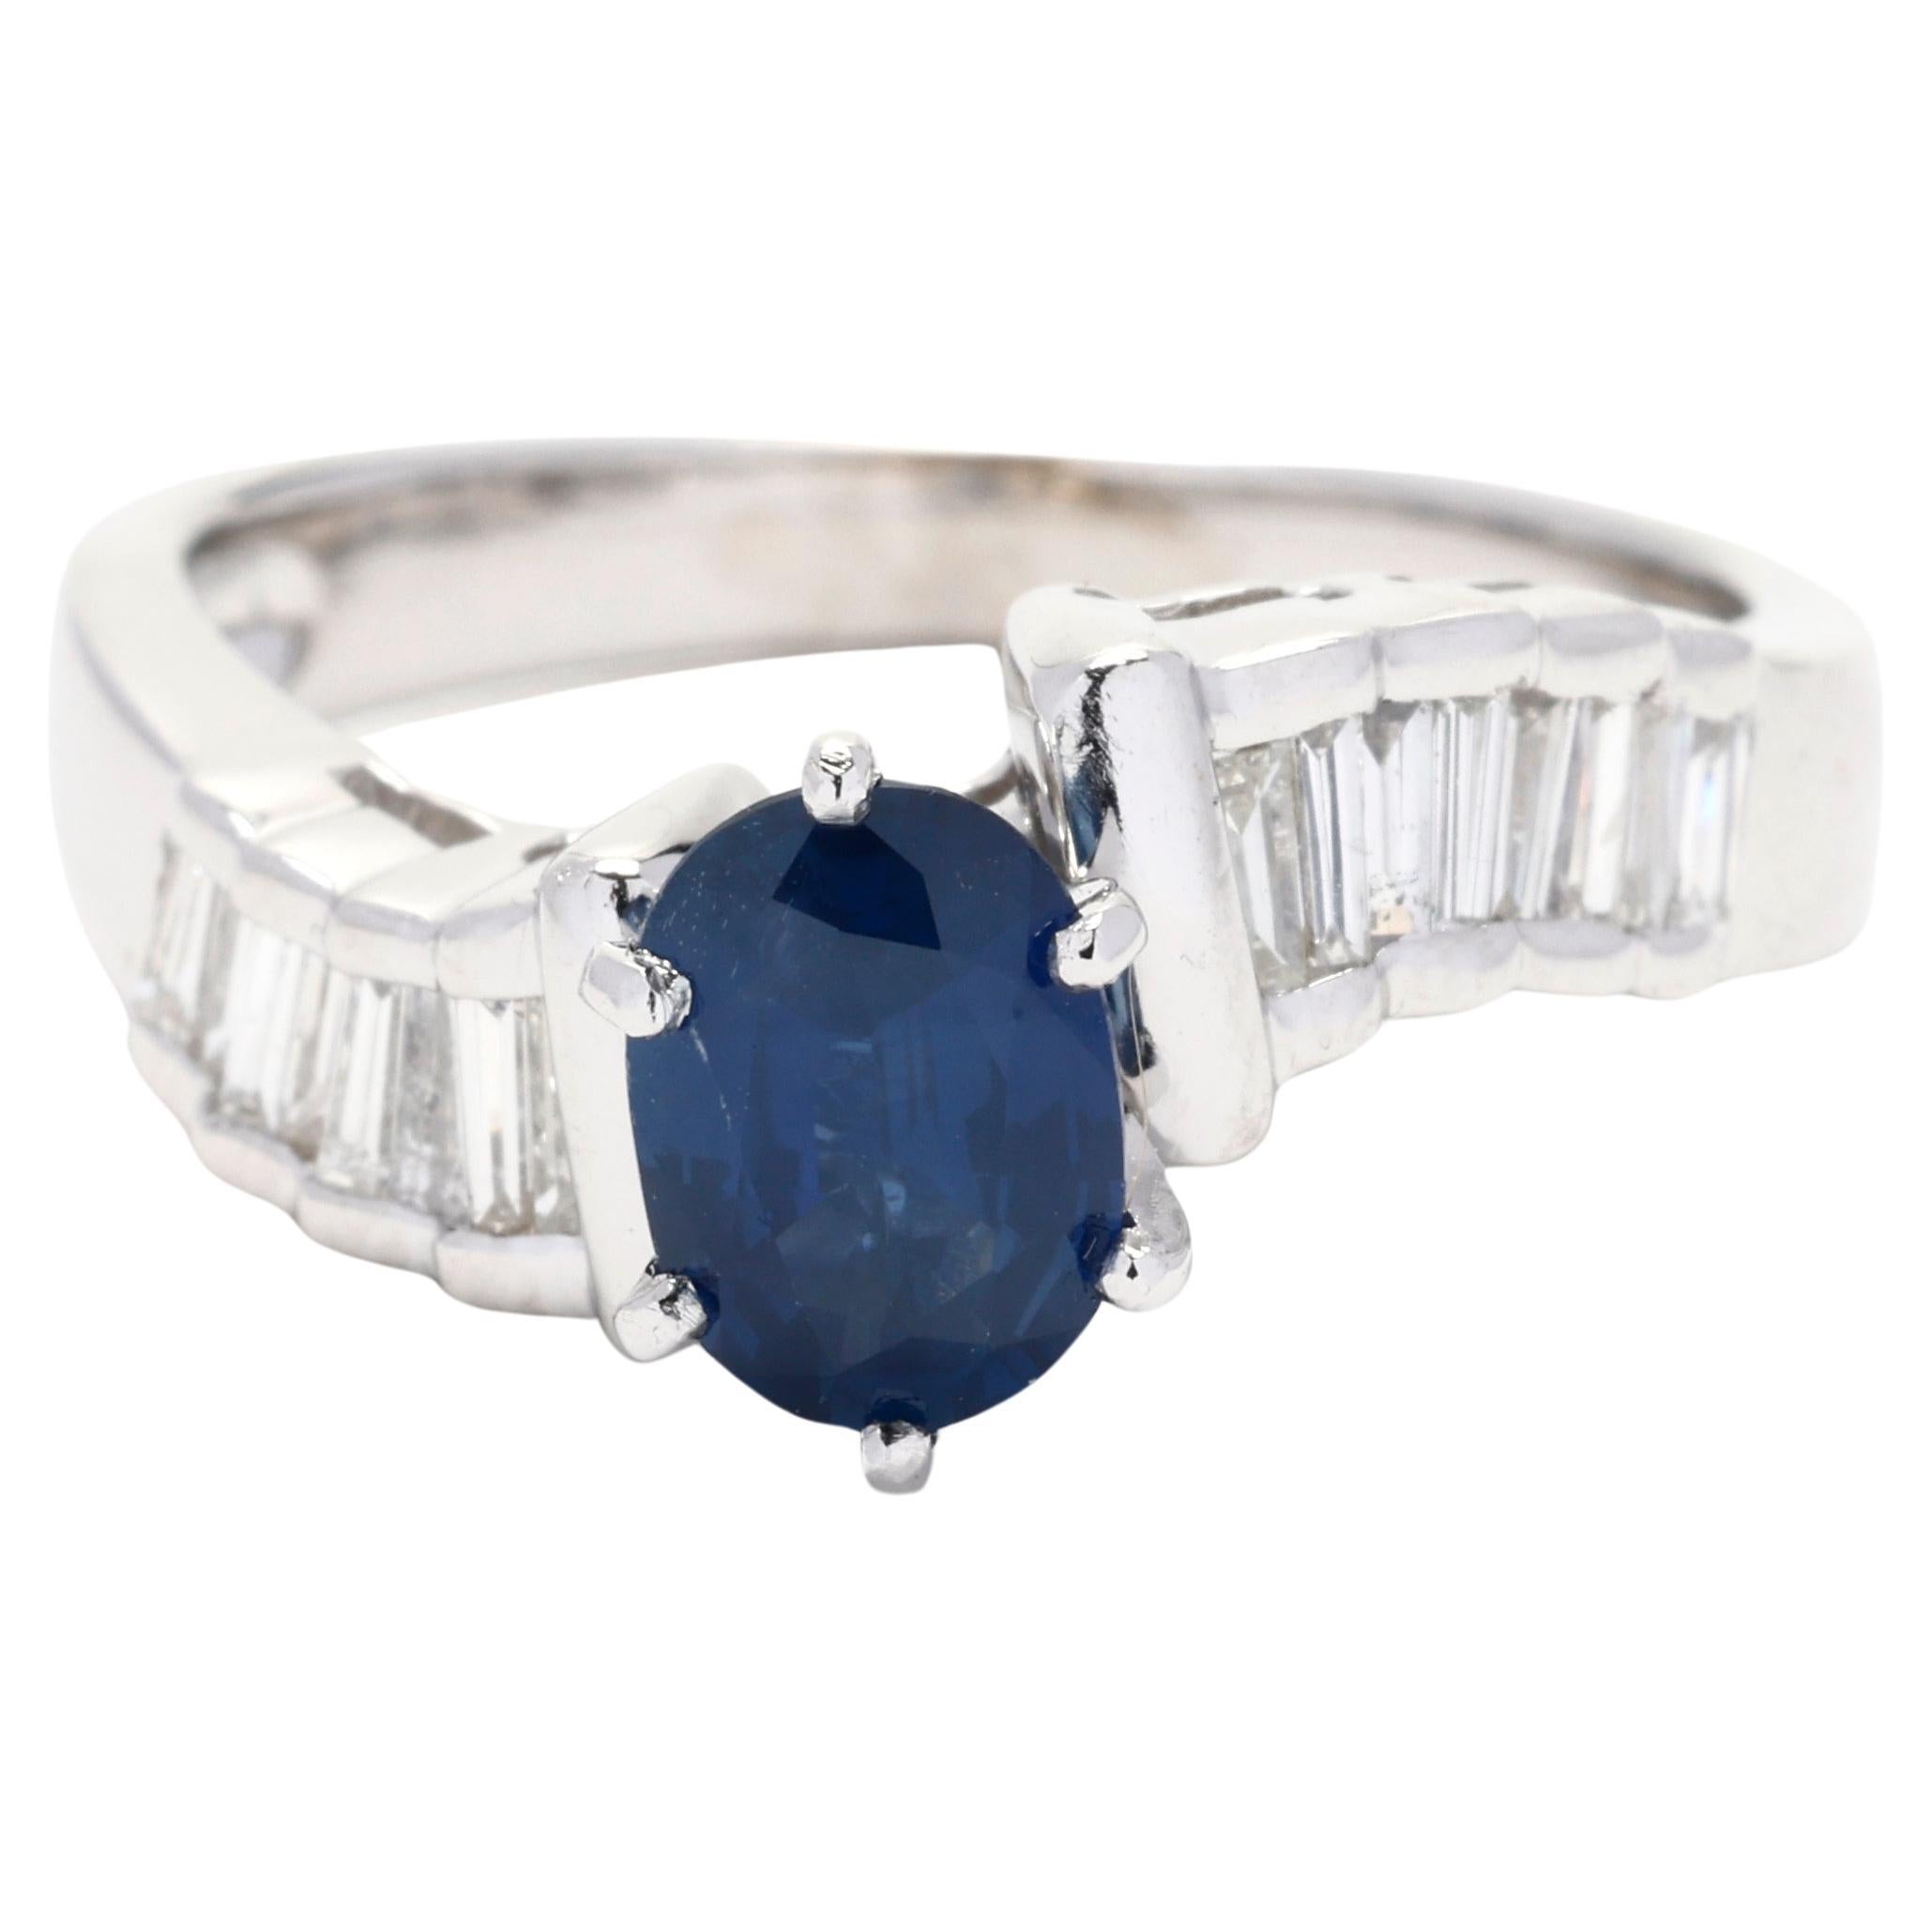 1.43ctw Sapphire and Diamond Engagement Ring, 14k White Gold, Ring Size 6.5